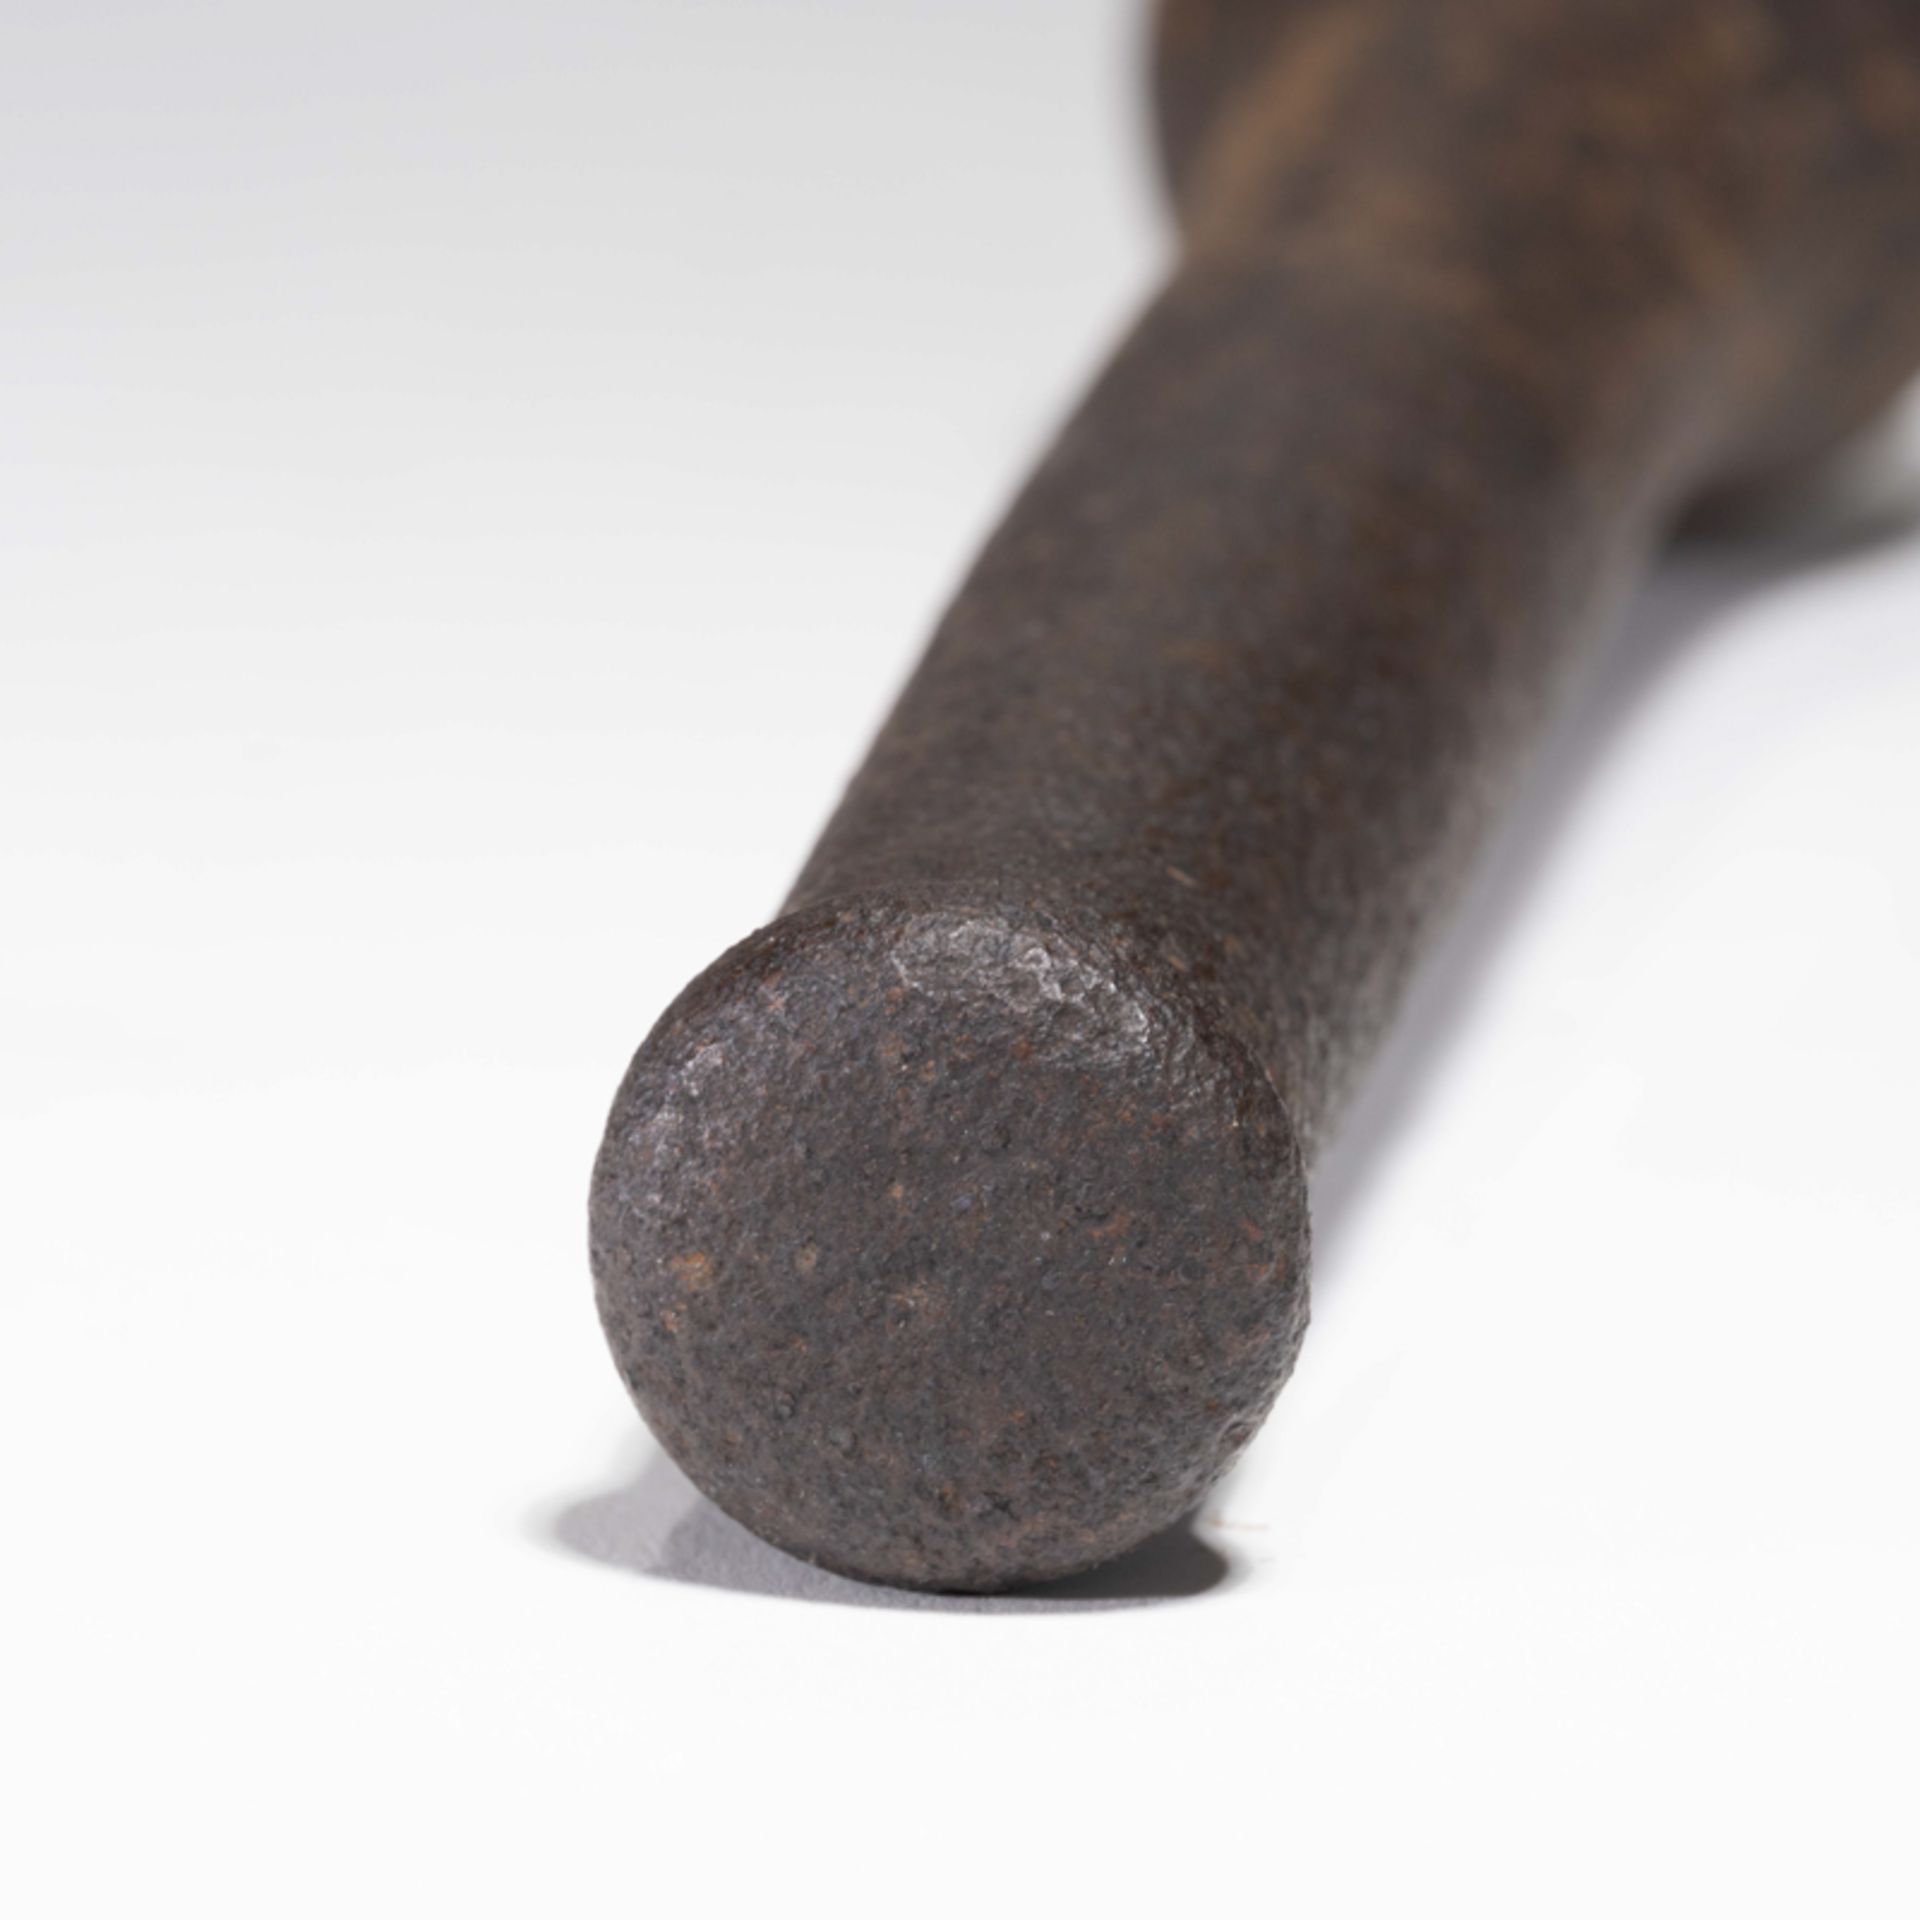 A KOREAN IRON SPICE GRINDER - Image 11 of 11